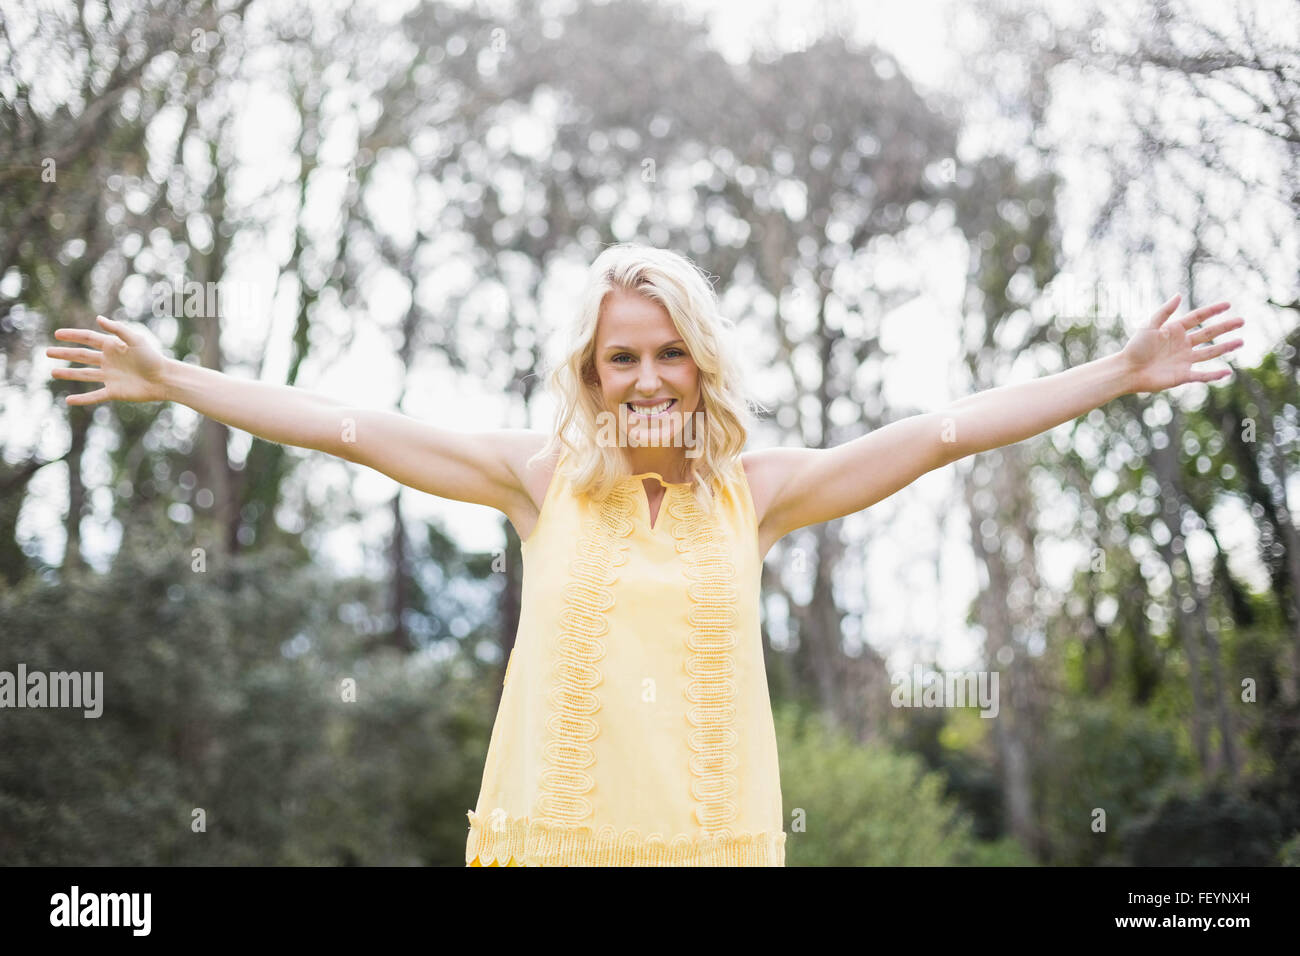 Happy woman with arms raised Stock Photo